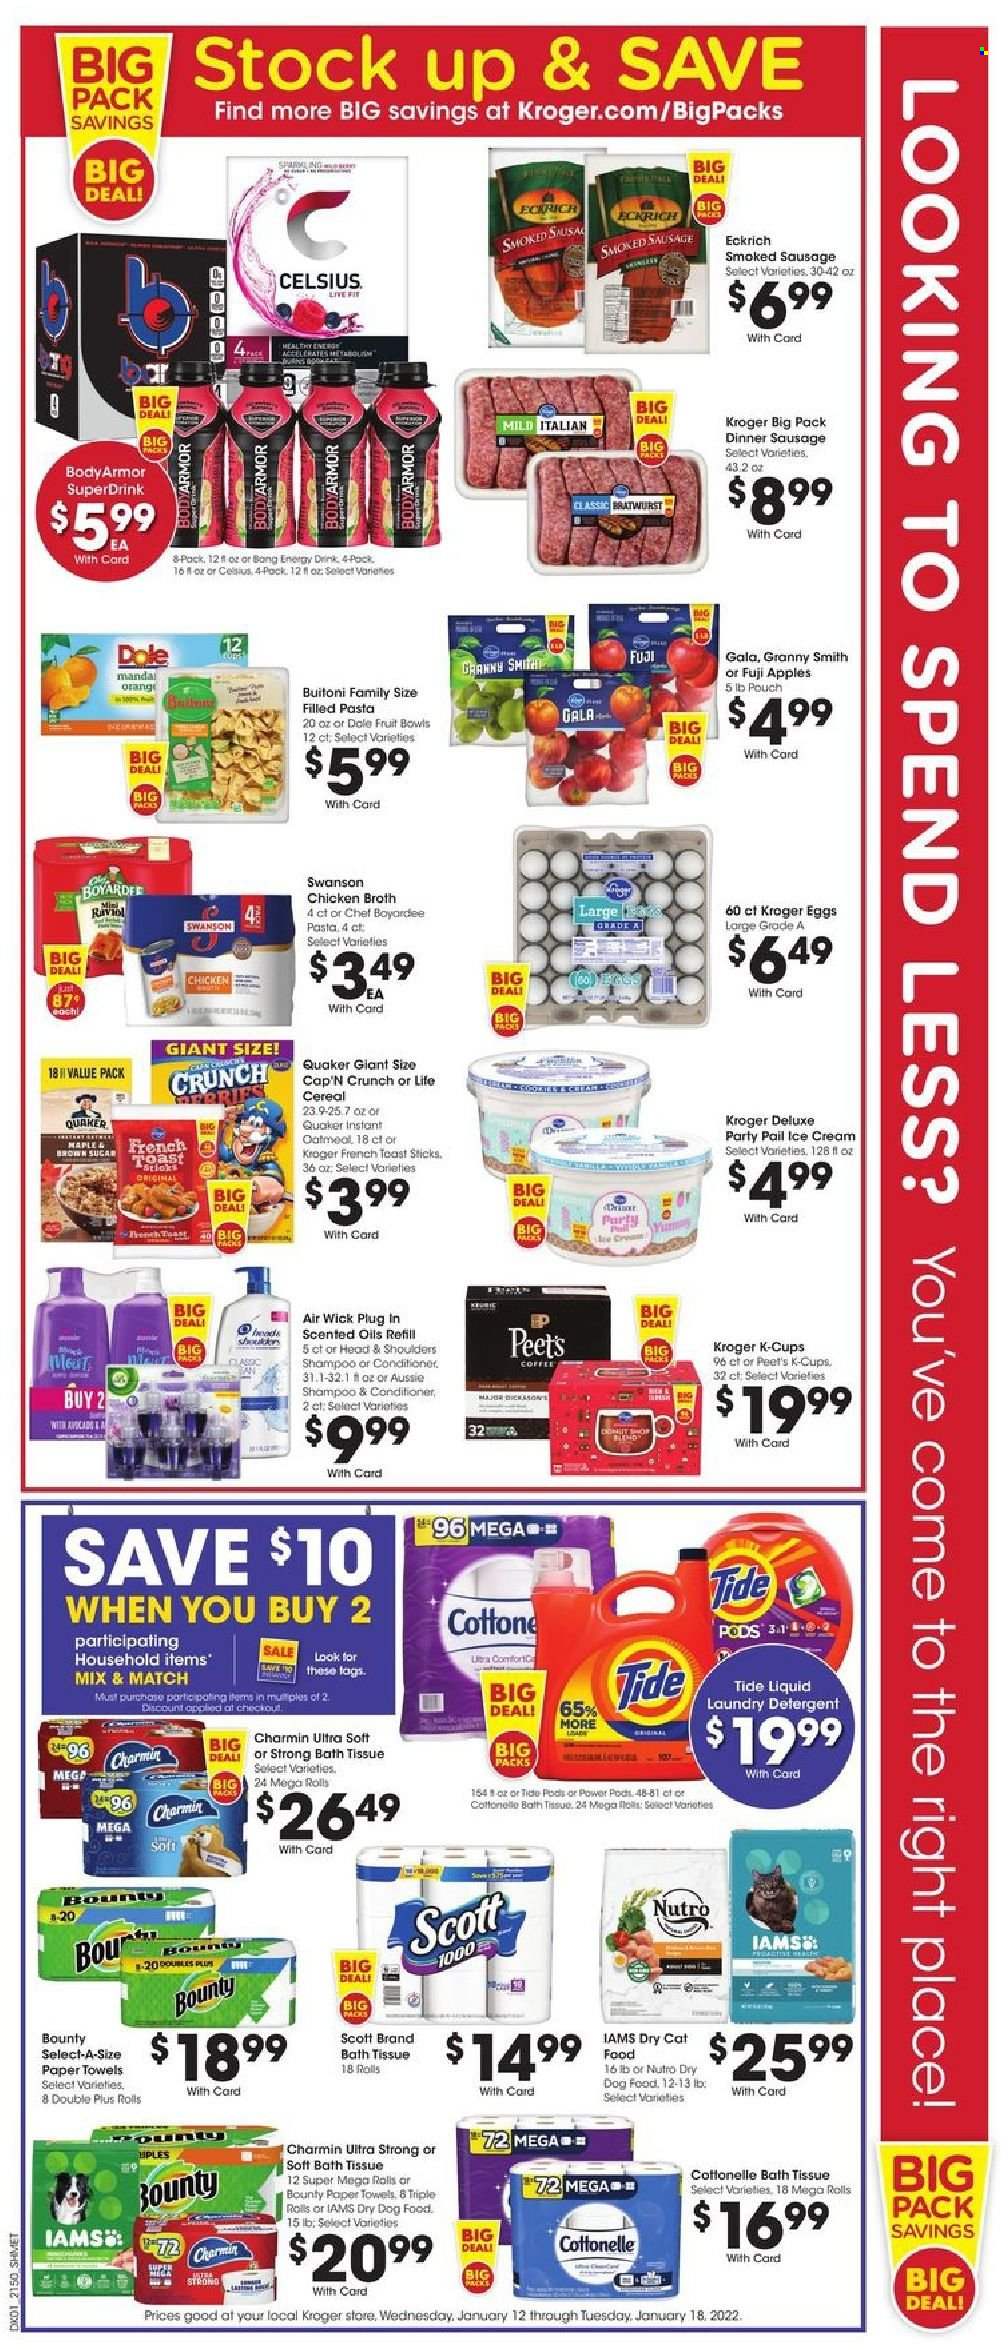 thumbnail - Kroger Flyer - 01/12/2022 - 01/18/2022 - Sales products - Dole, apples, Gala, oranges, Fuji apple, Granny Smith, pasta, Quaker, Buitoni, filled pasta, bratwurst, sausage, smoked sausage, eggs, ice cream, Bounty, chicken broth, oatmeal, broth, cereals, Cap'n Crunch, energy drink, coffee, coffee capsules, K-Cups, bath tissue, Cottonelle, Scott, kitchen towels, paper towels, Charmin, detergent, Tide, laundry detergent, shampoo, Aussie, conditioner, Head & Shoulders, Air Wick, animal food, cat food, dog food, dry dog food, dry cat food, Iams, Lee. Page 2.